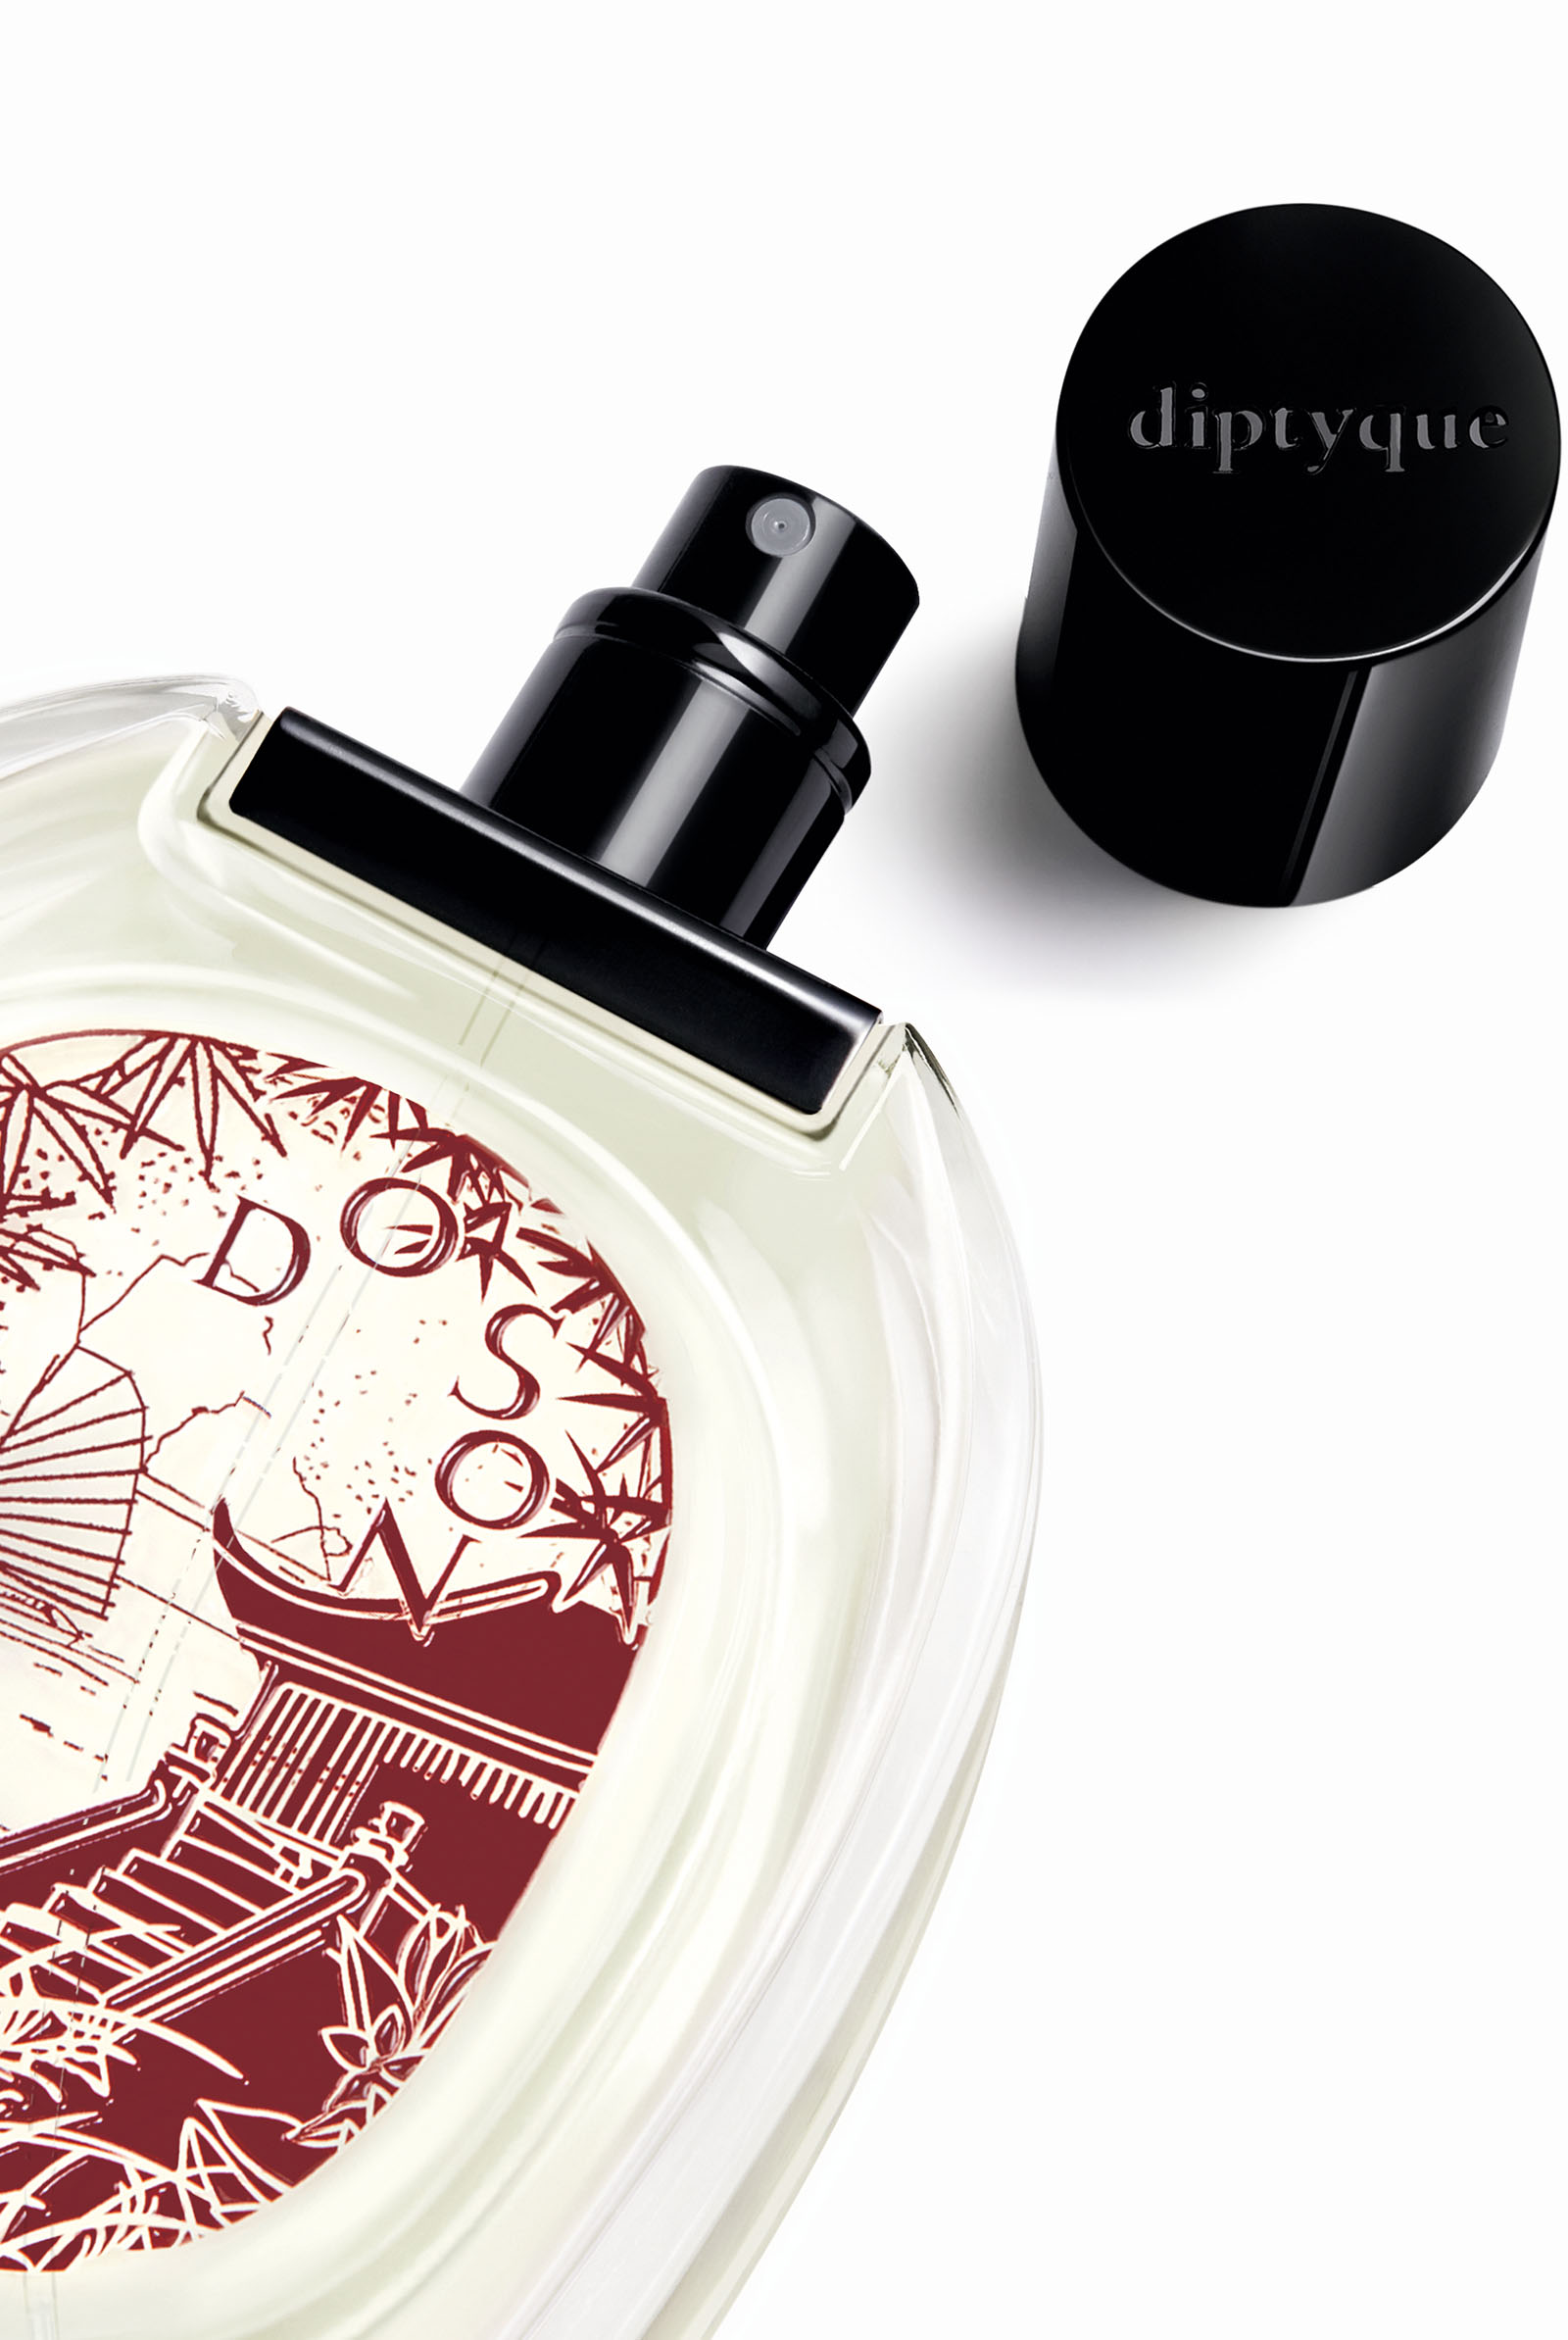 A bottle of diptyque's do son eau de parfum, a scent / perfume/ fragrance inspired by tuberoses